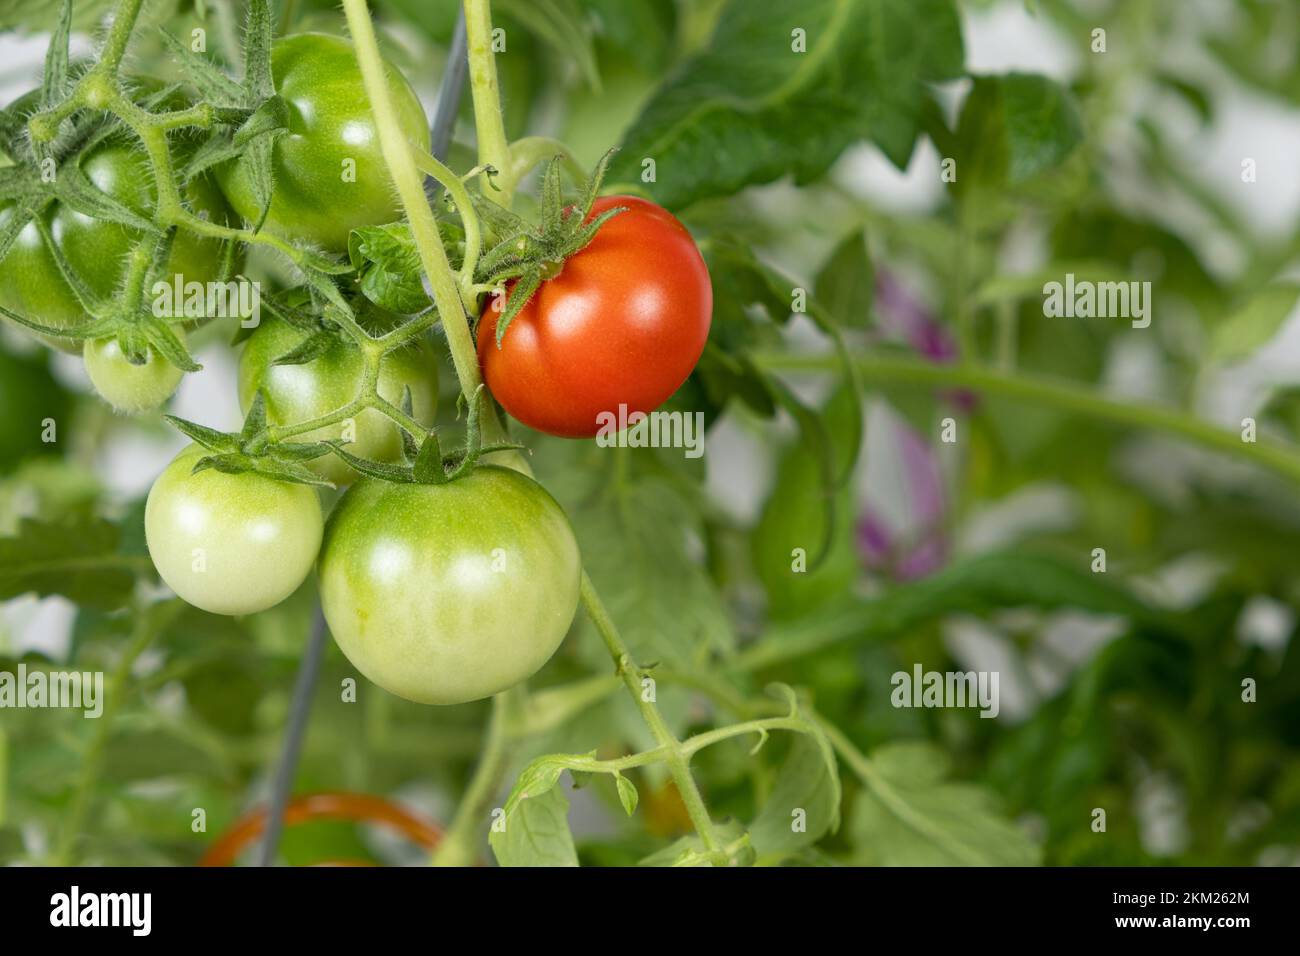 Growing tomatoes from seeds, step by step. Step 13 - ripe tomatoes Stock Photo